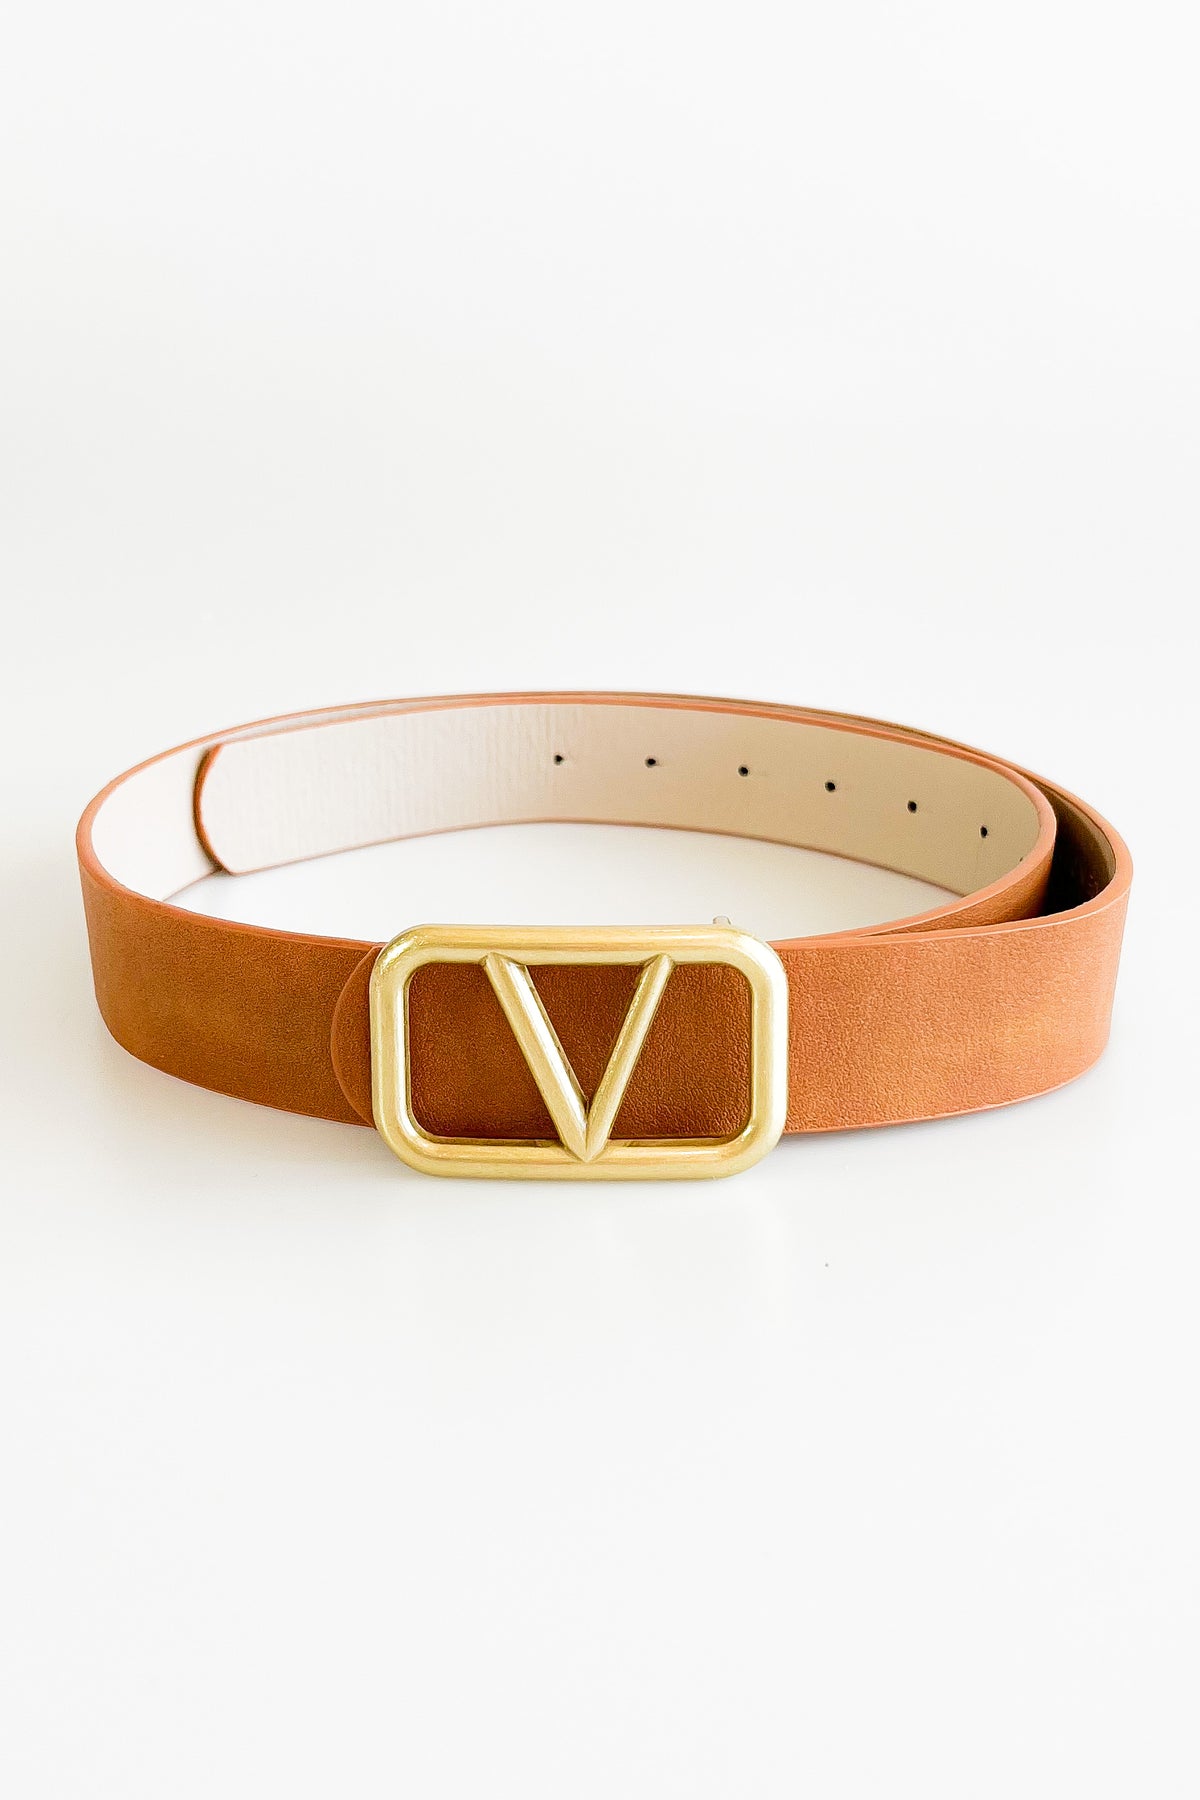 Boite V Buckle Belt - Camel-260 Other Accessories-ICCO ACCESSORIES-Coastal Bloom Boutique, find the trendiest versions of the popular styles and looks Located in Indialantic, FL